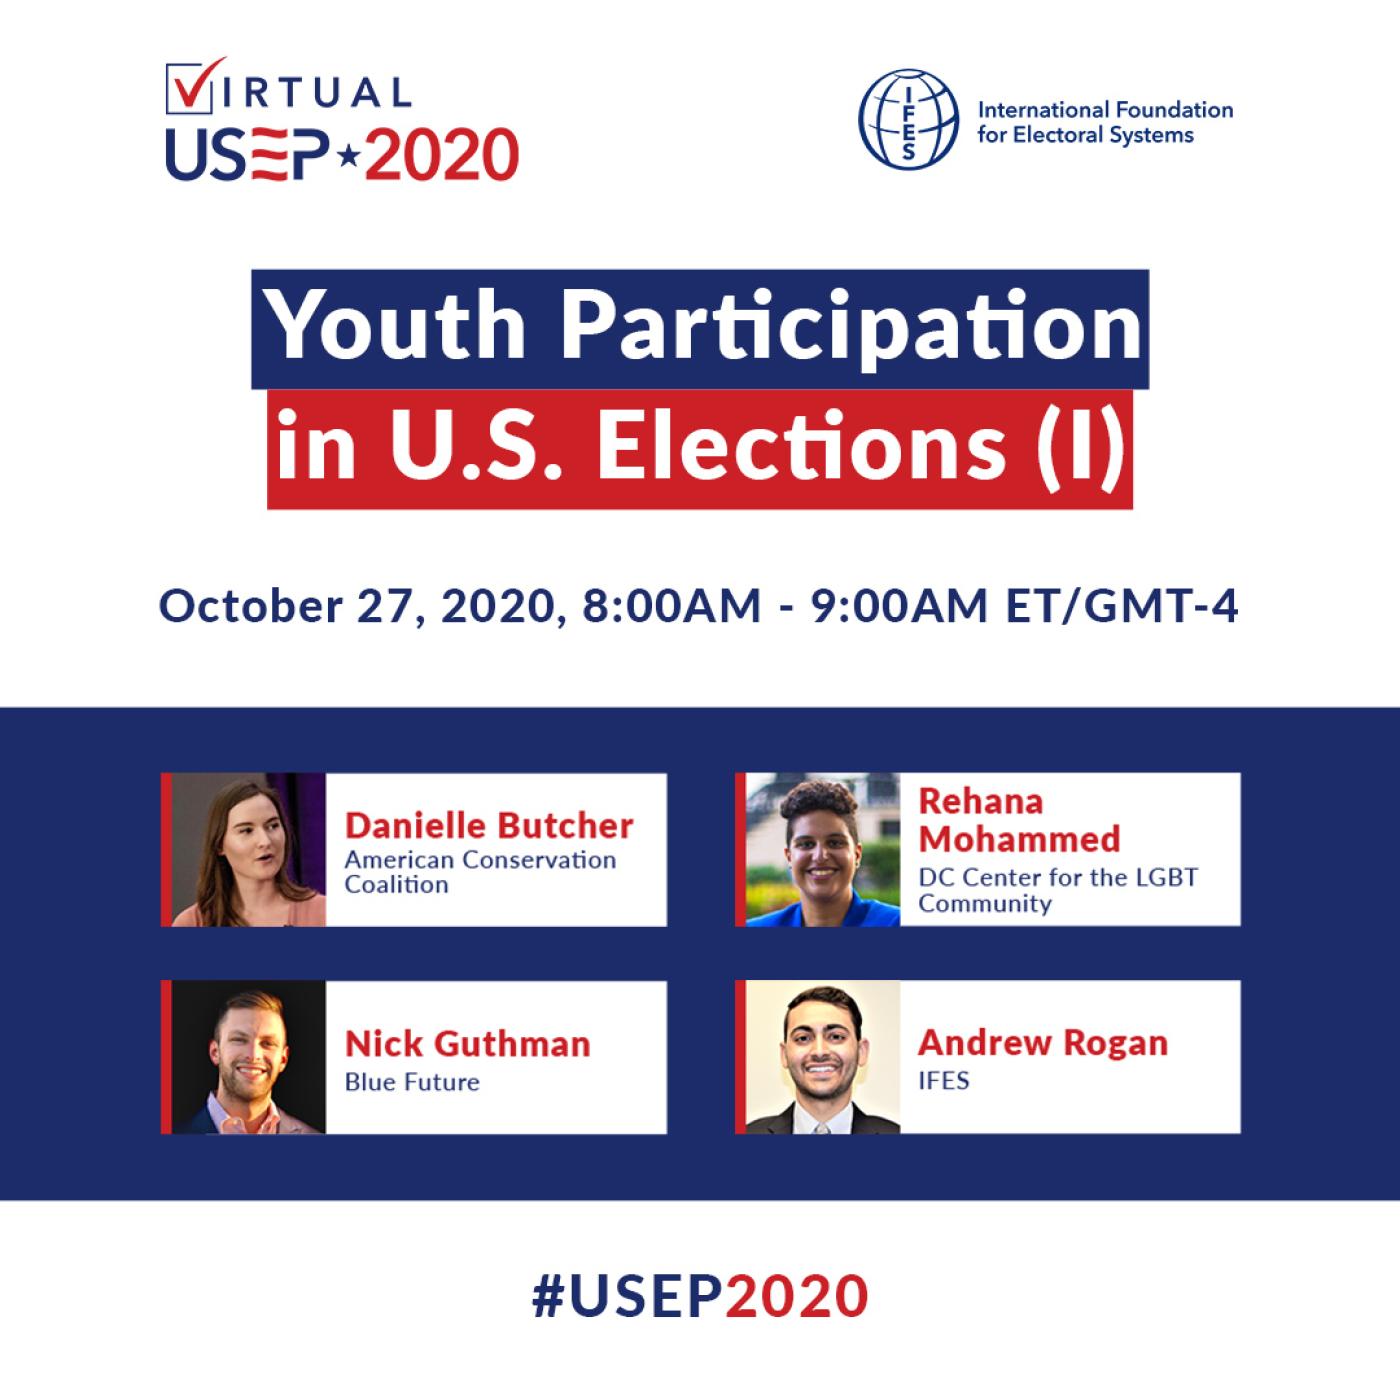 Youth Participation in U.S. Election (I)